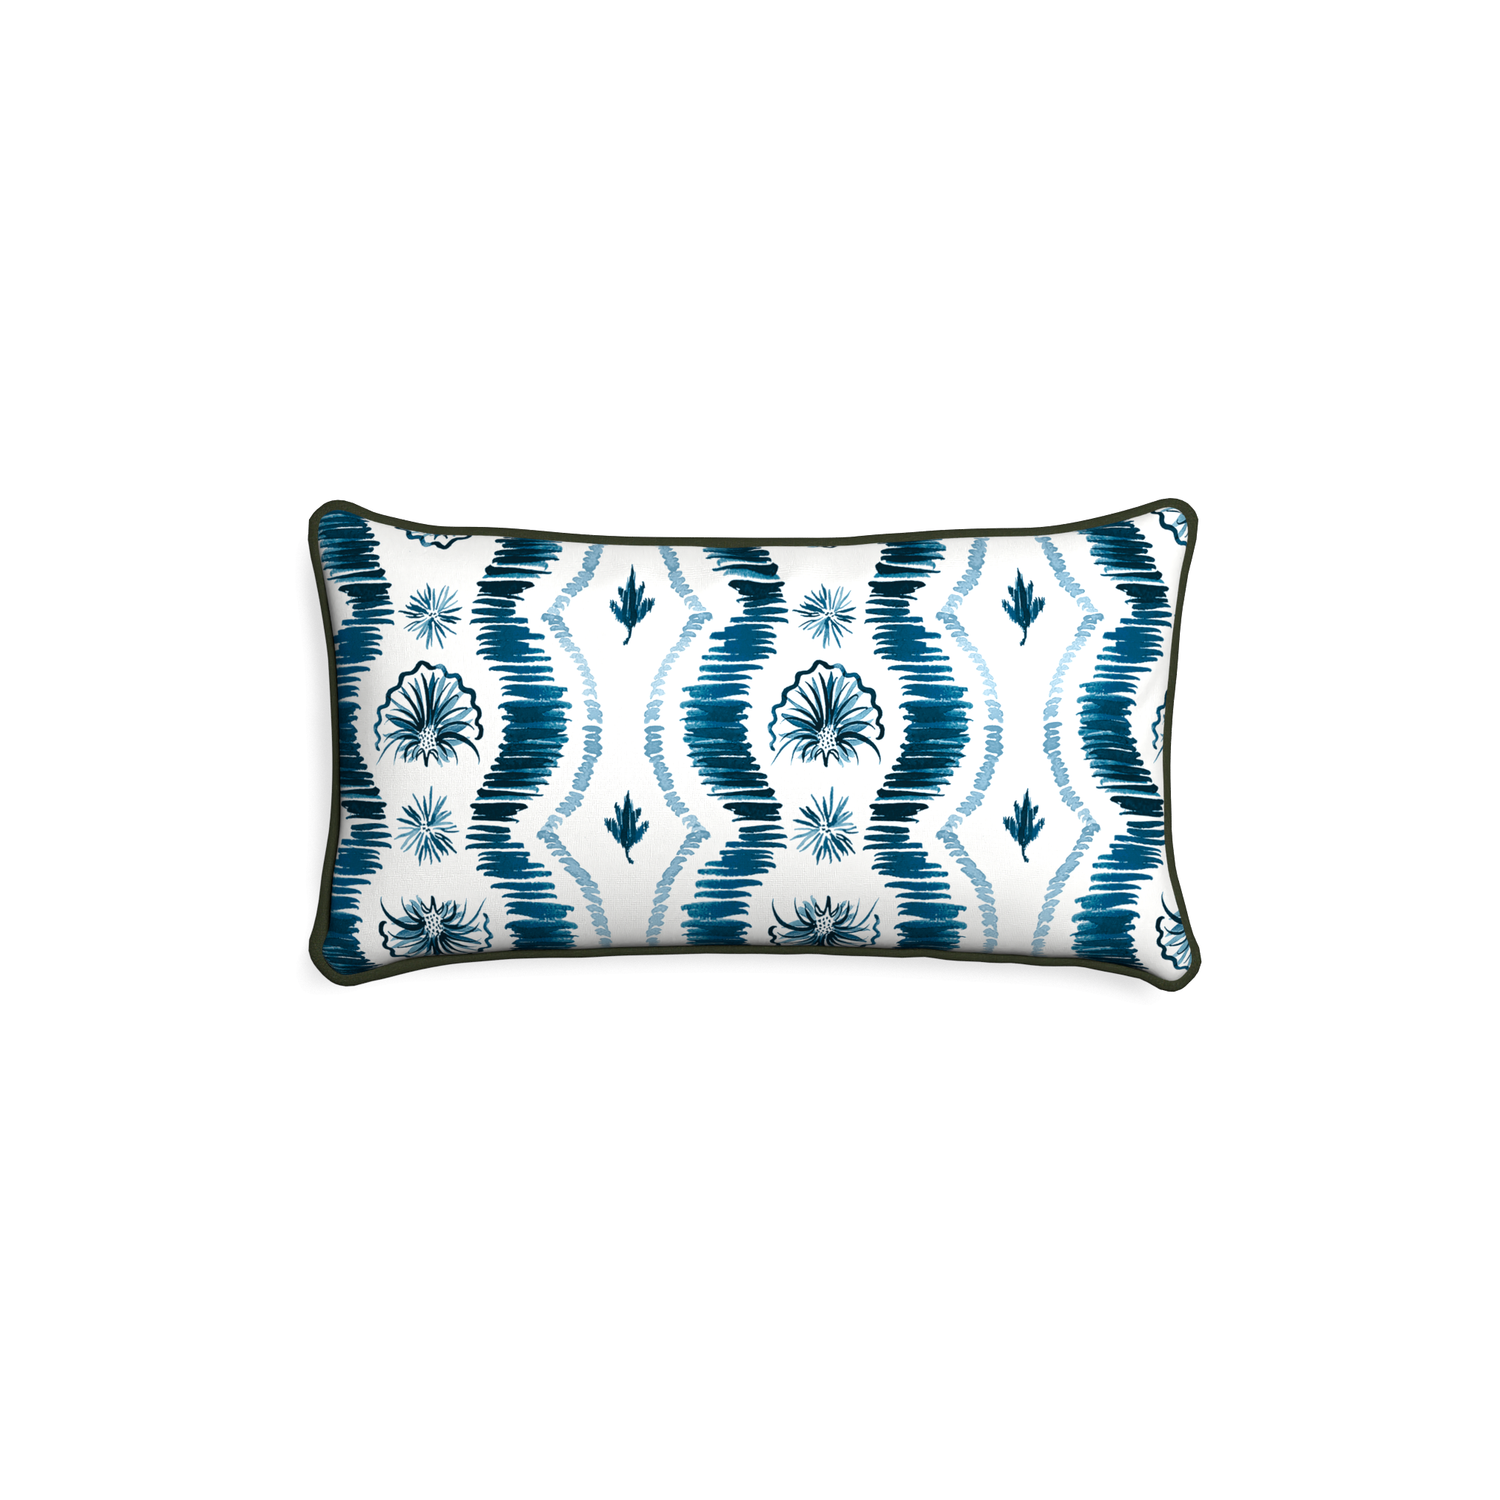 Petite-lumbar alice custom blue ikatpillow with f piping on white background